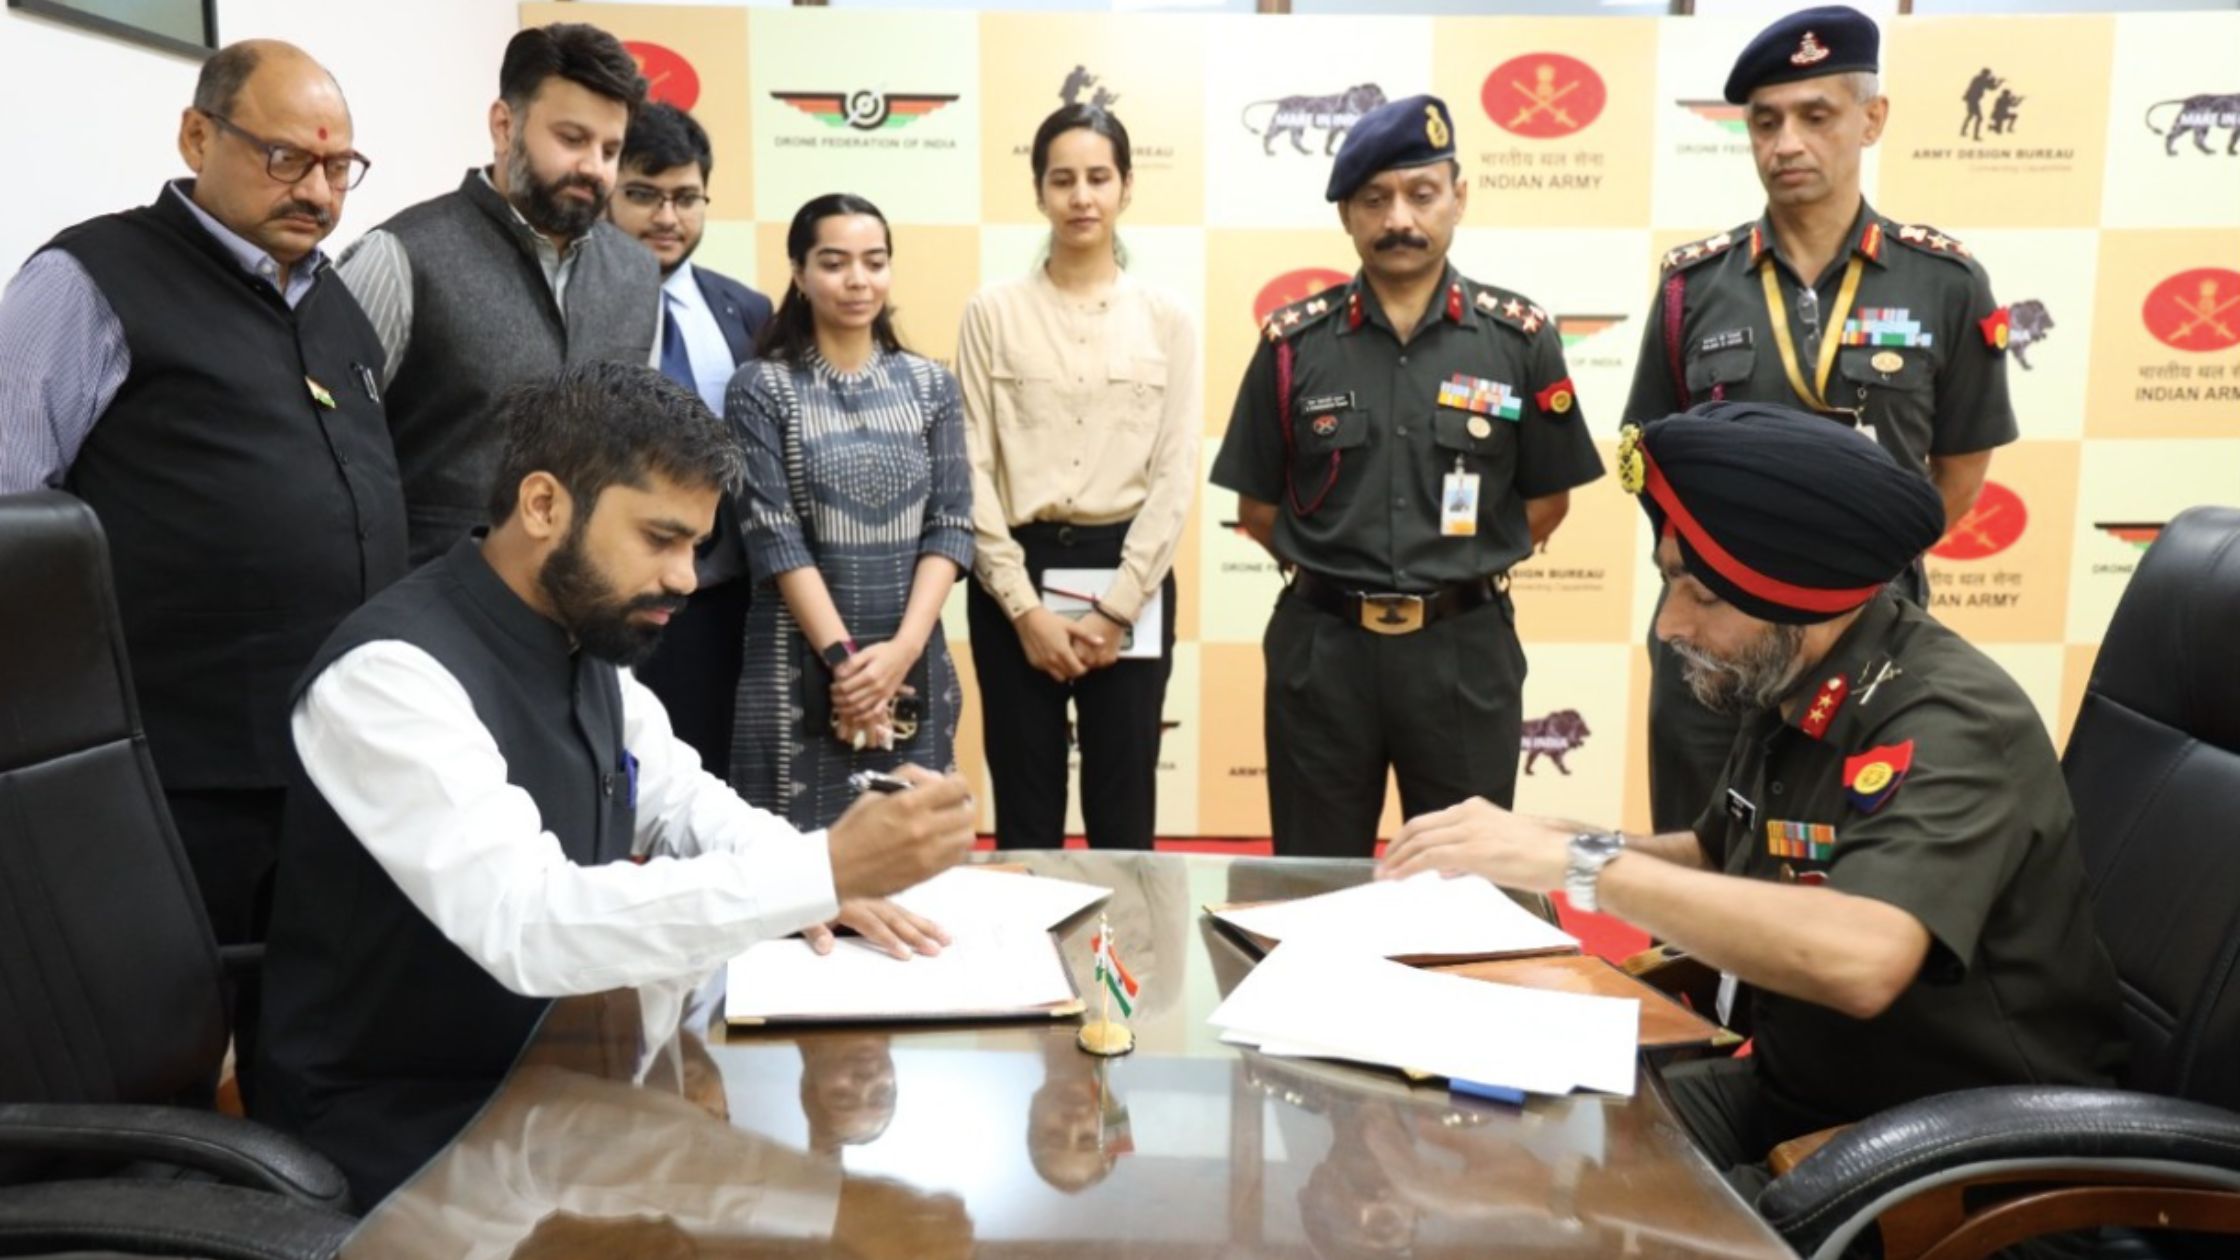 Drone Federation of India and Indian Army sign MoU for accelerating drone technology development